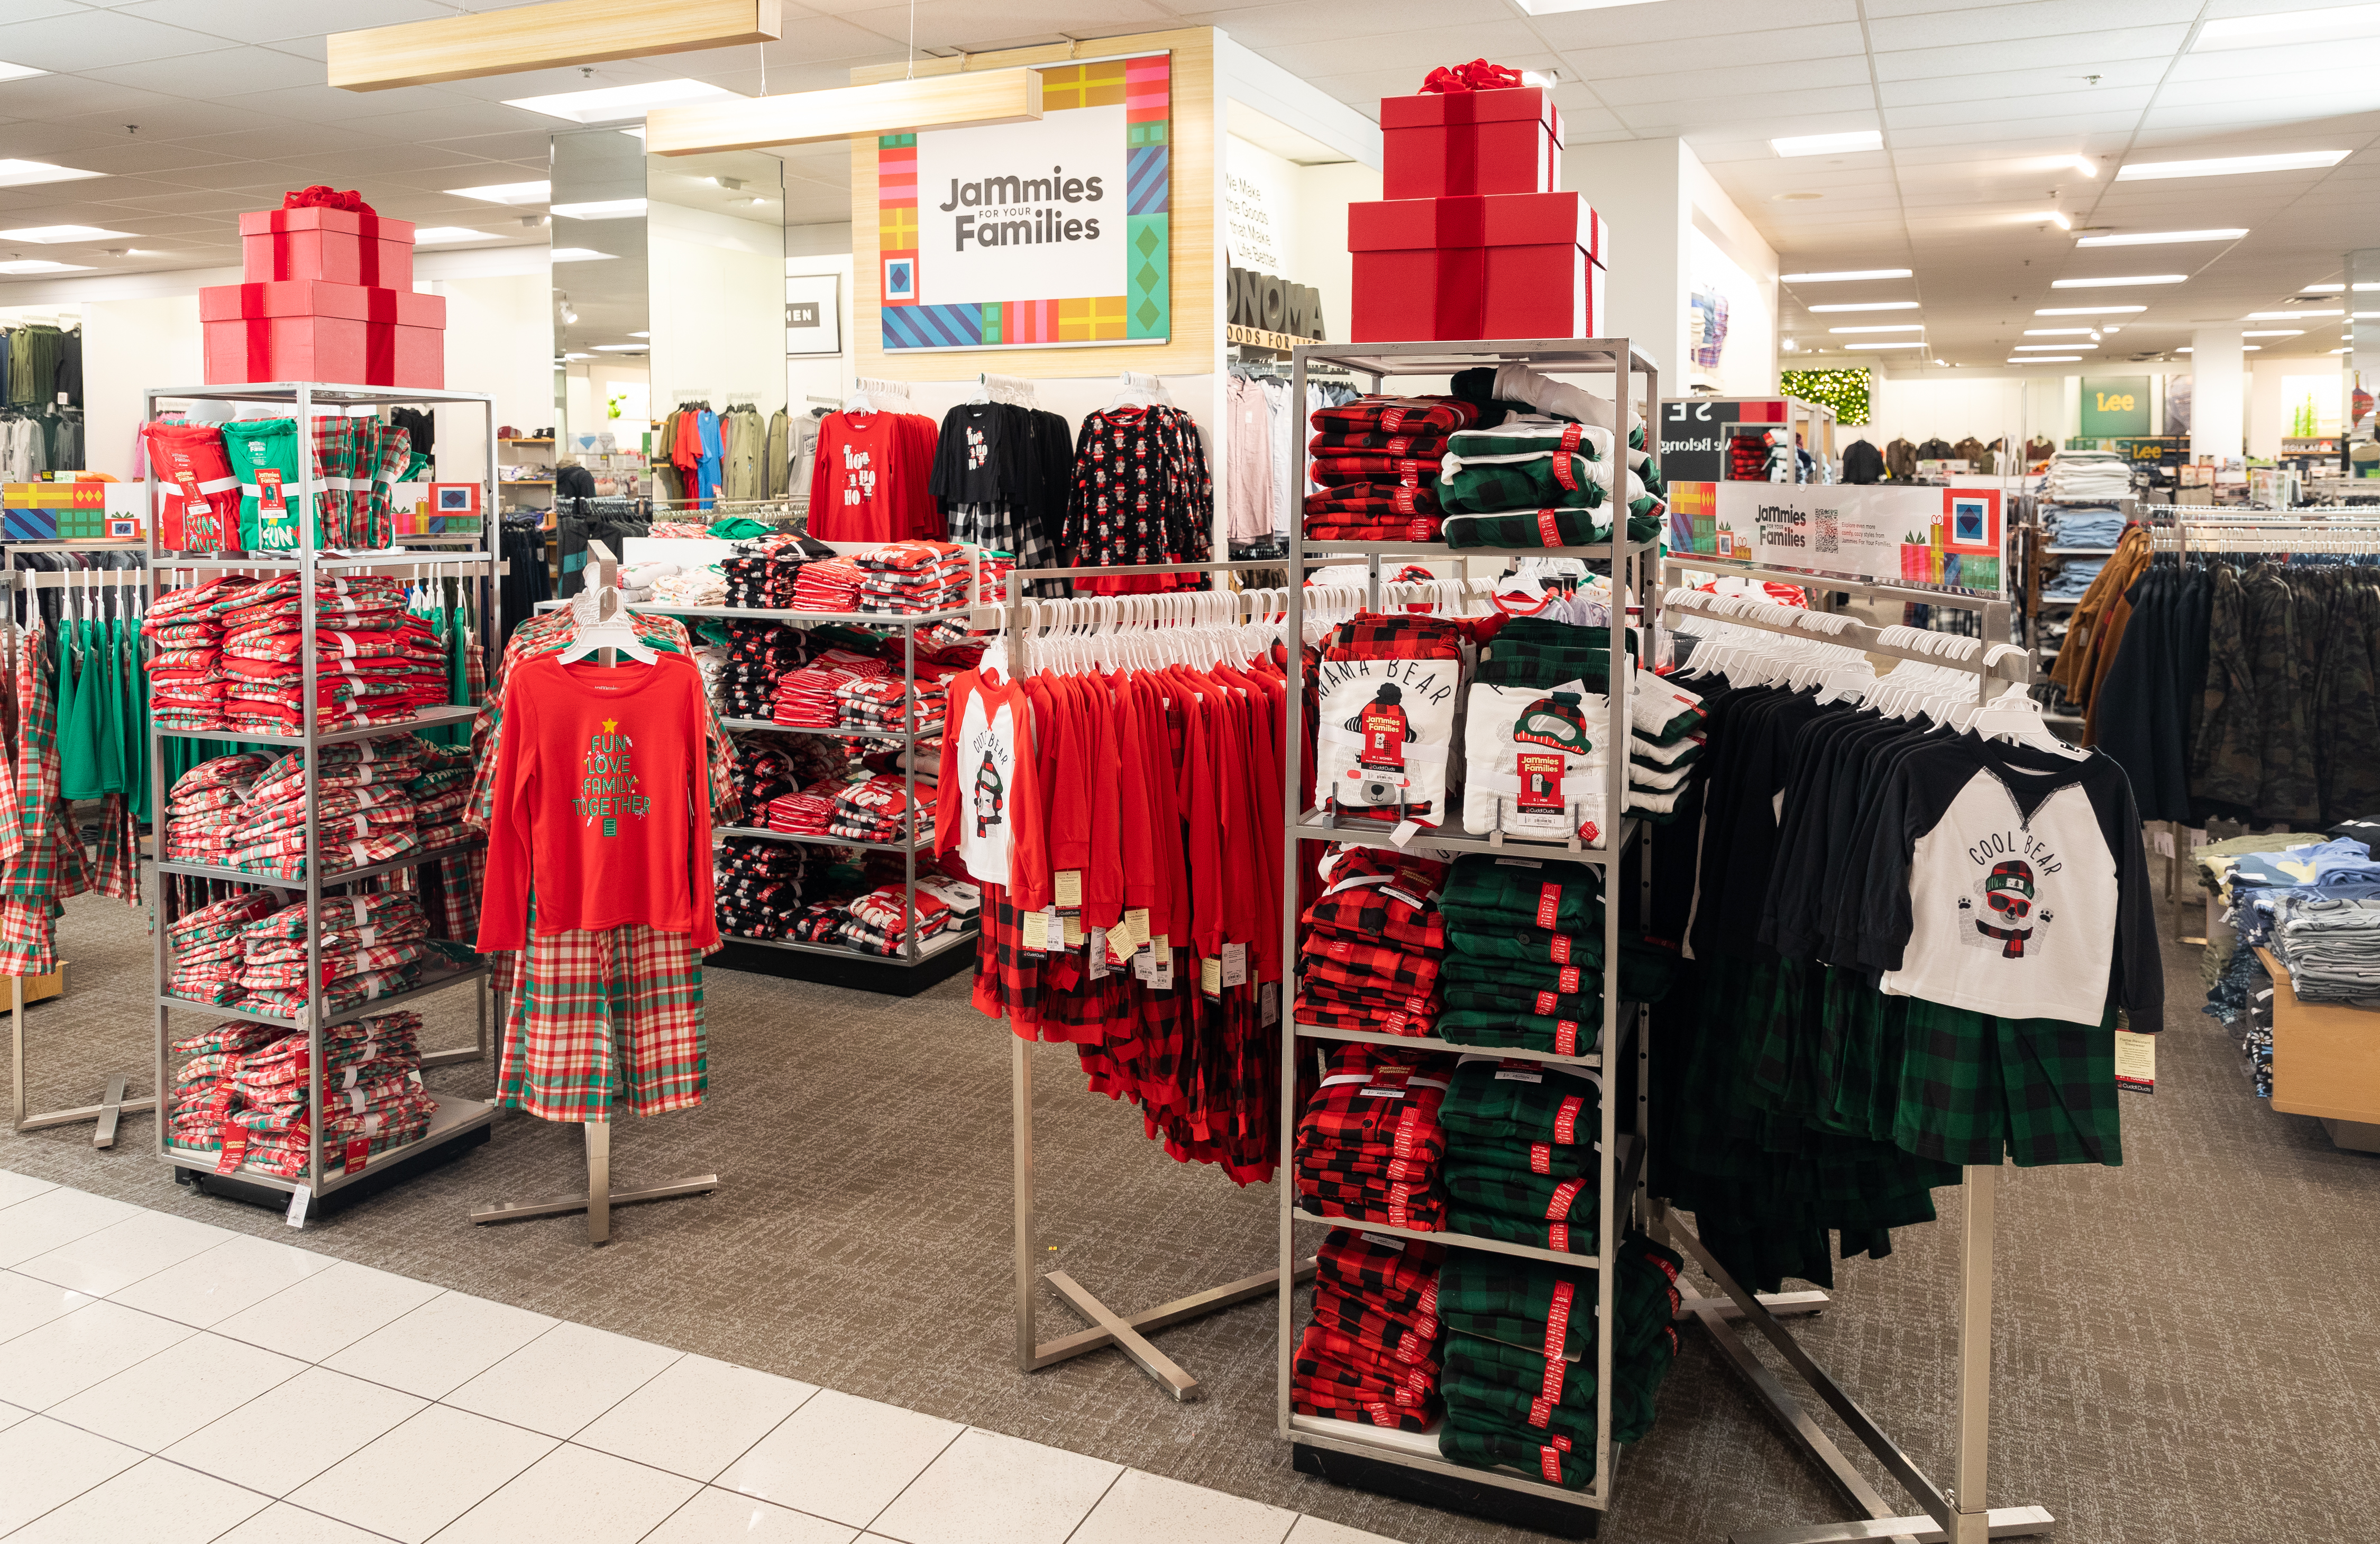 Kohls store interior hi-res stock photography and images - Alamy